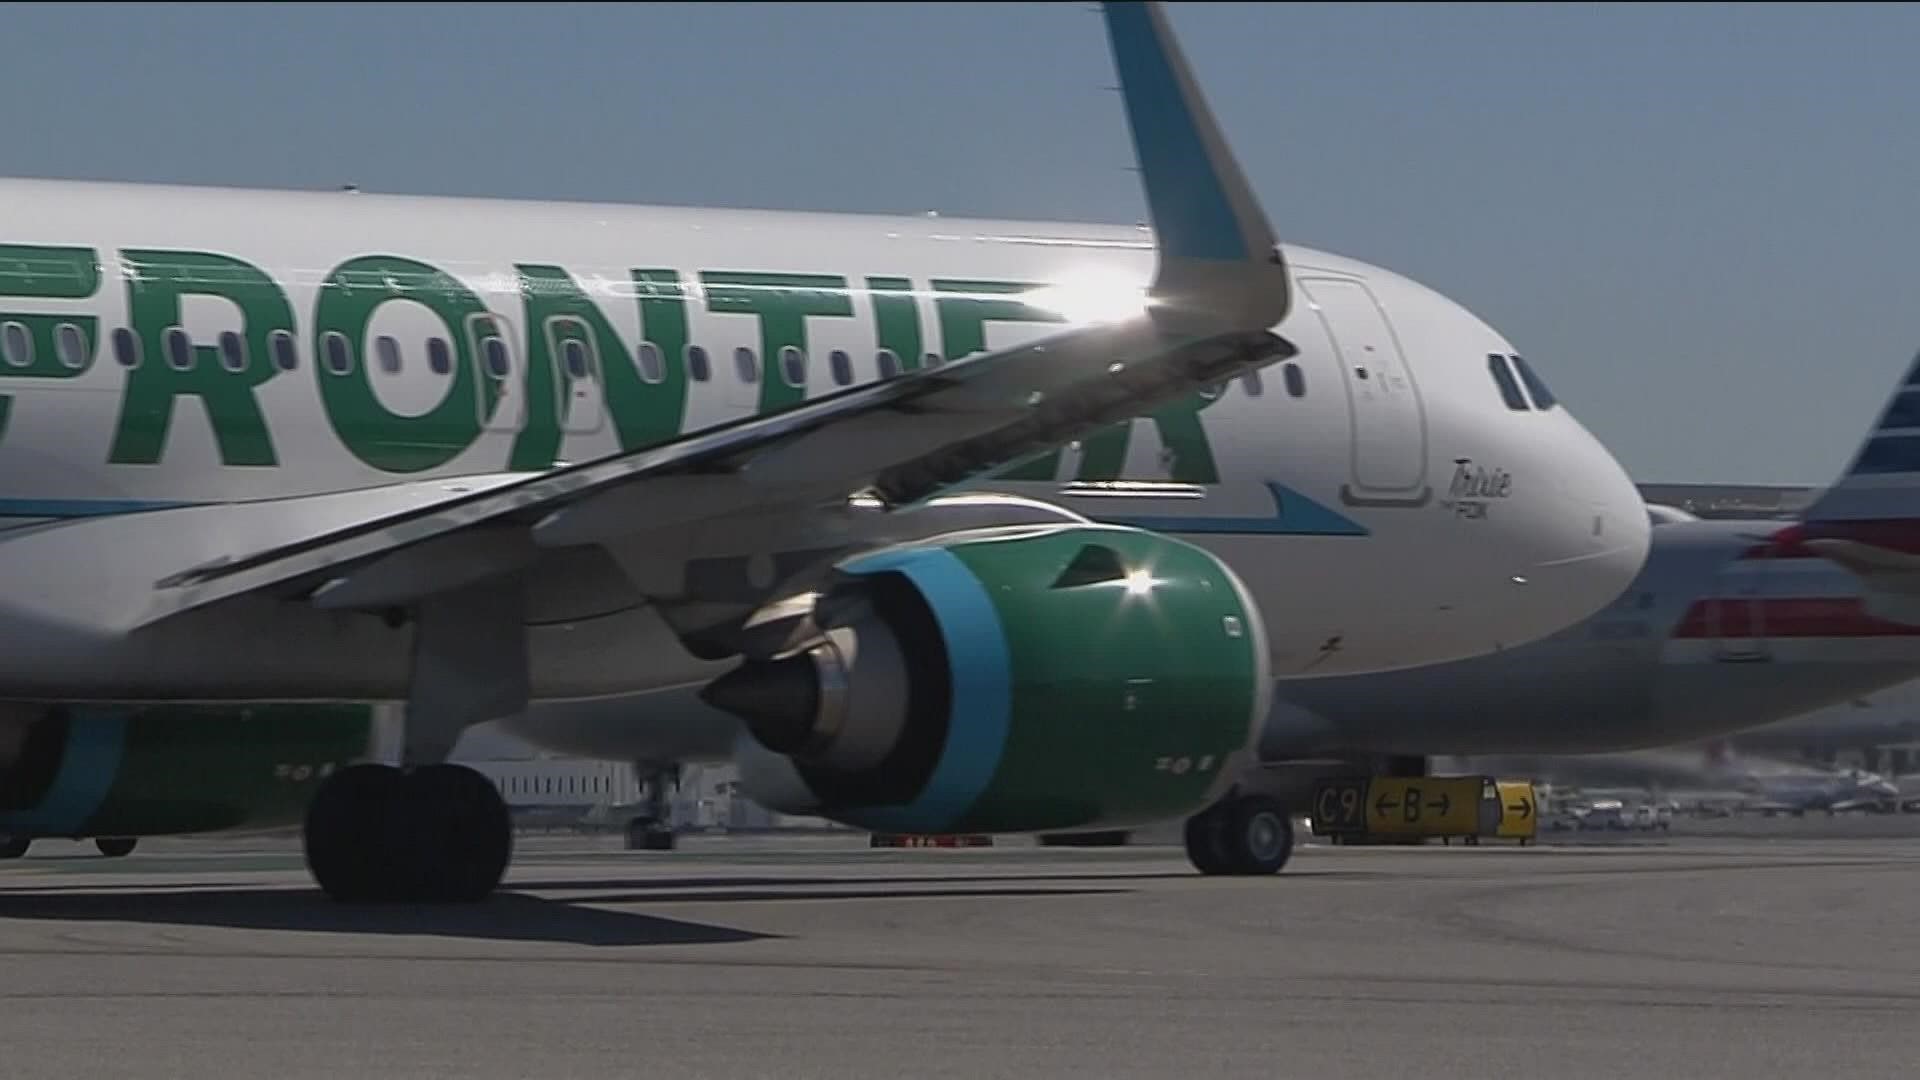 The plane's origin was based out of Cincinnati traveling to its destination in Tampa.